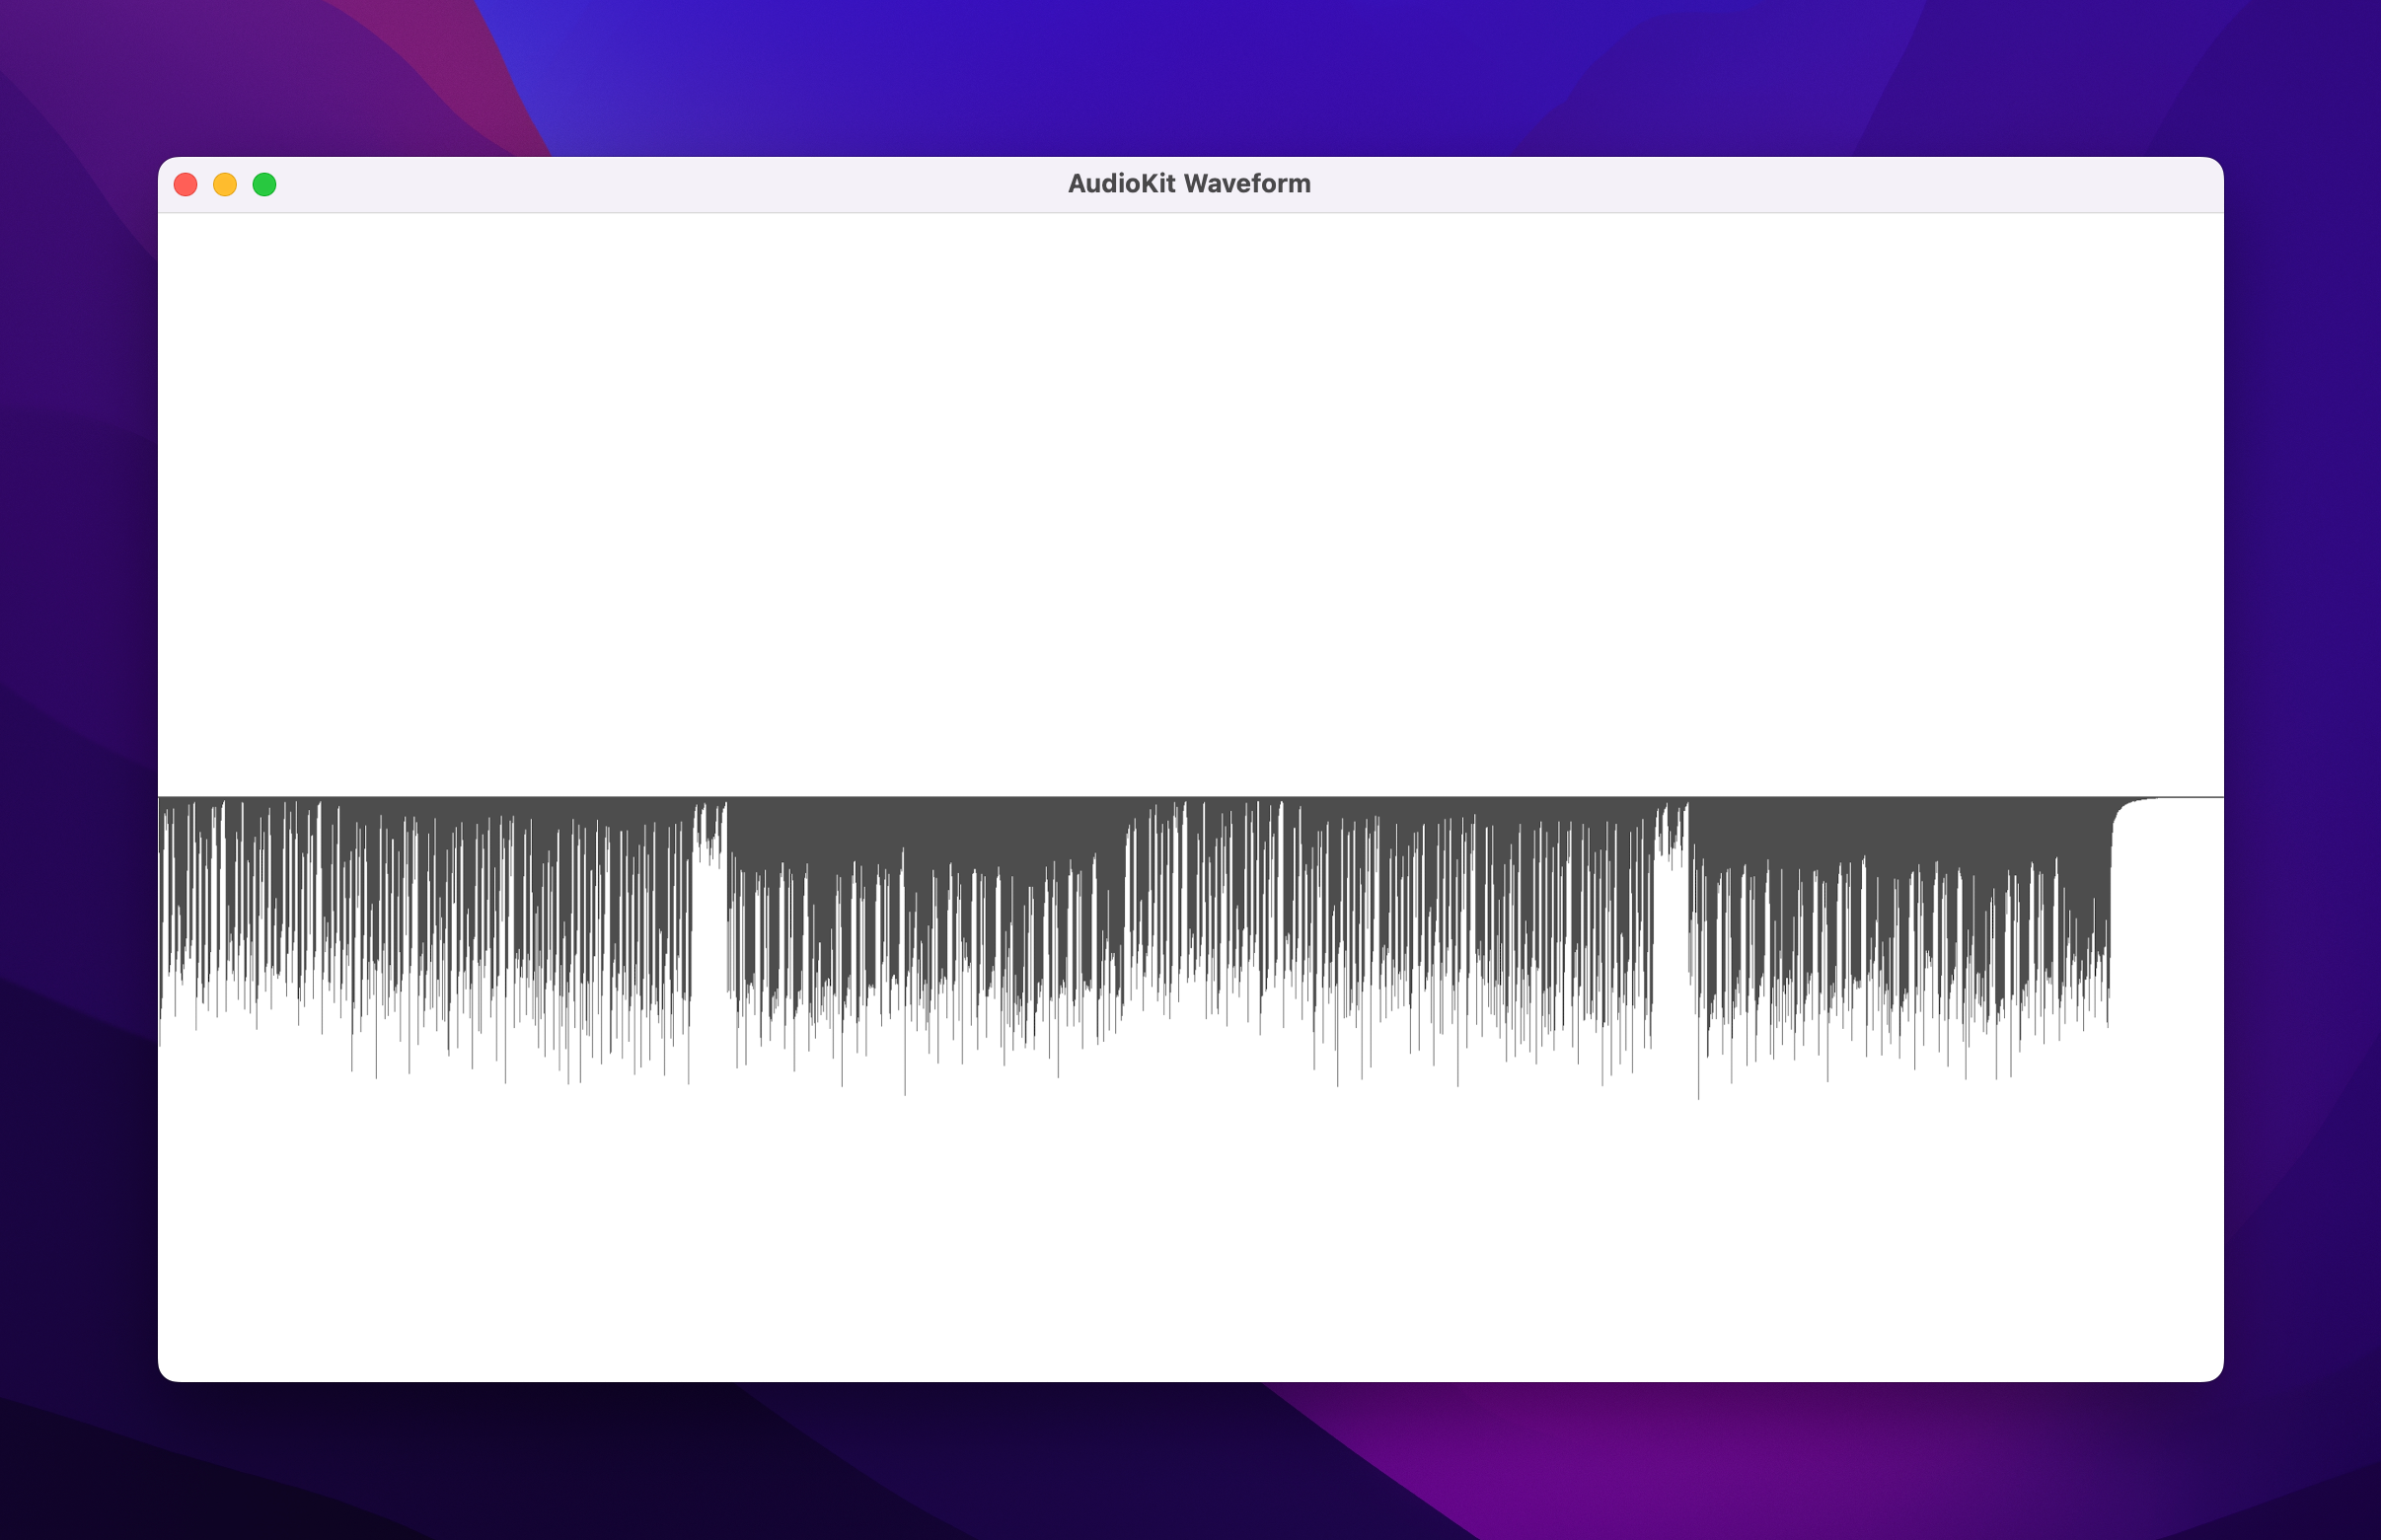 An image displaying the waveform drawn only for the bottom half